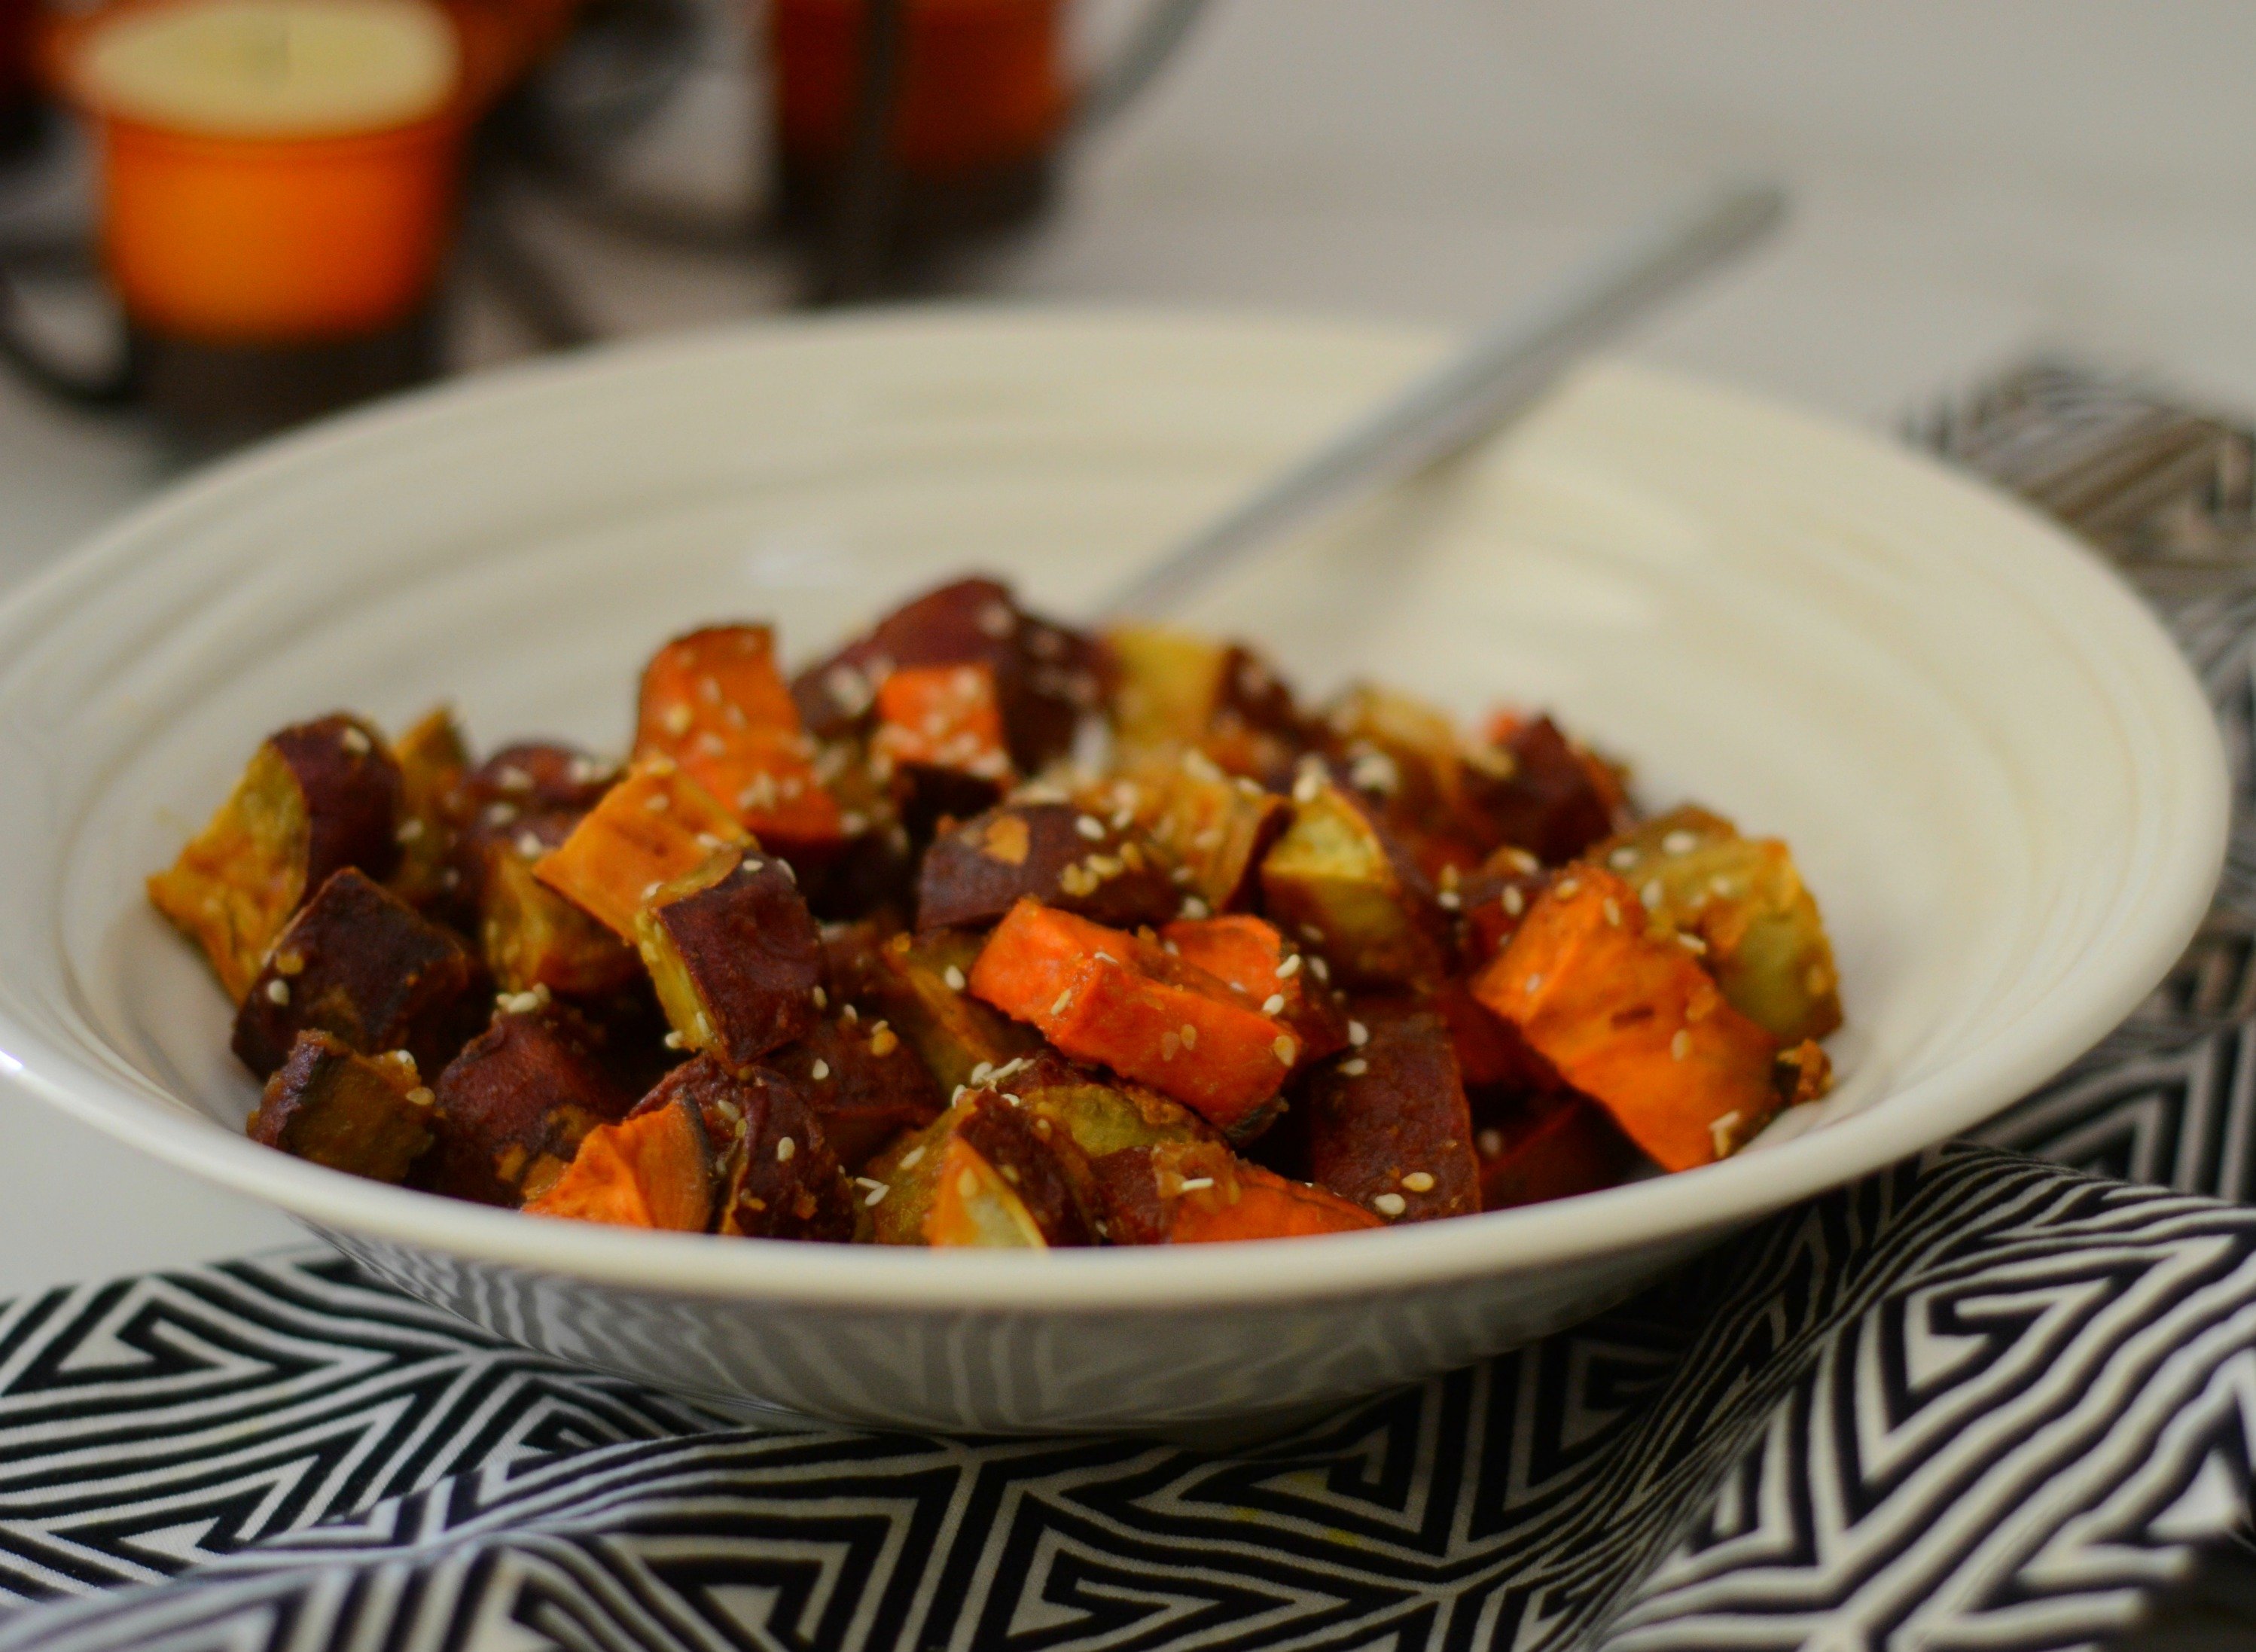 One of my favorite restaurants has these miso glazed sweet potatoes on the menu and I had to recreate them. So rich in flavor and healthy. Add to your Thanksgiving table, or any night of the week. | www.thesurferskitchen.com